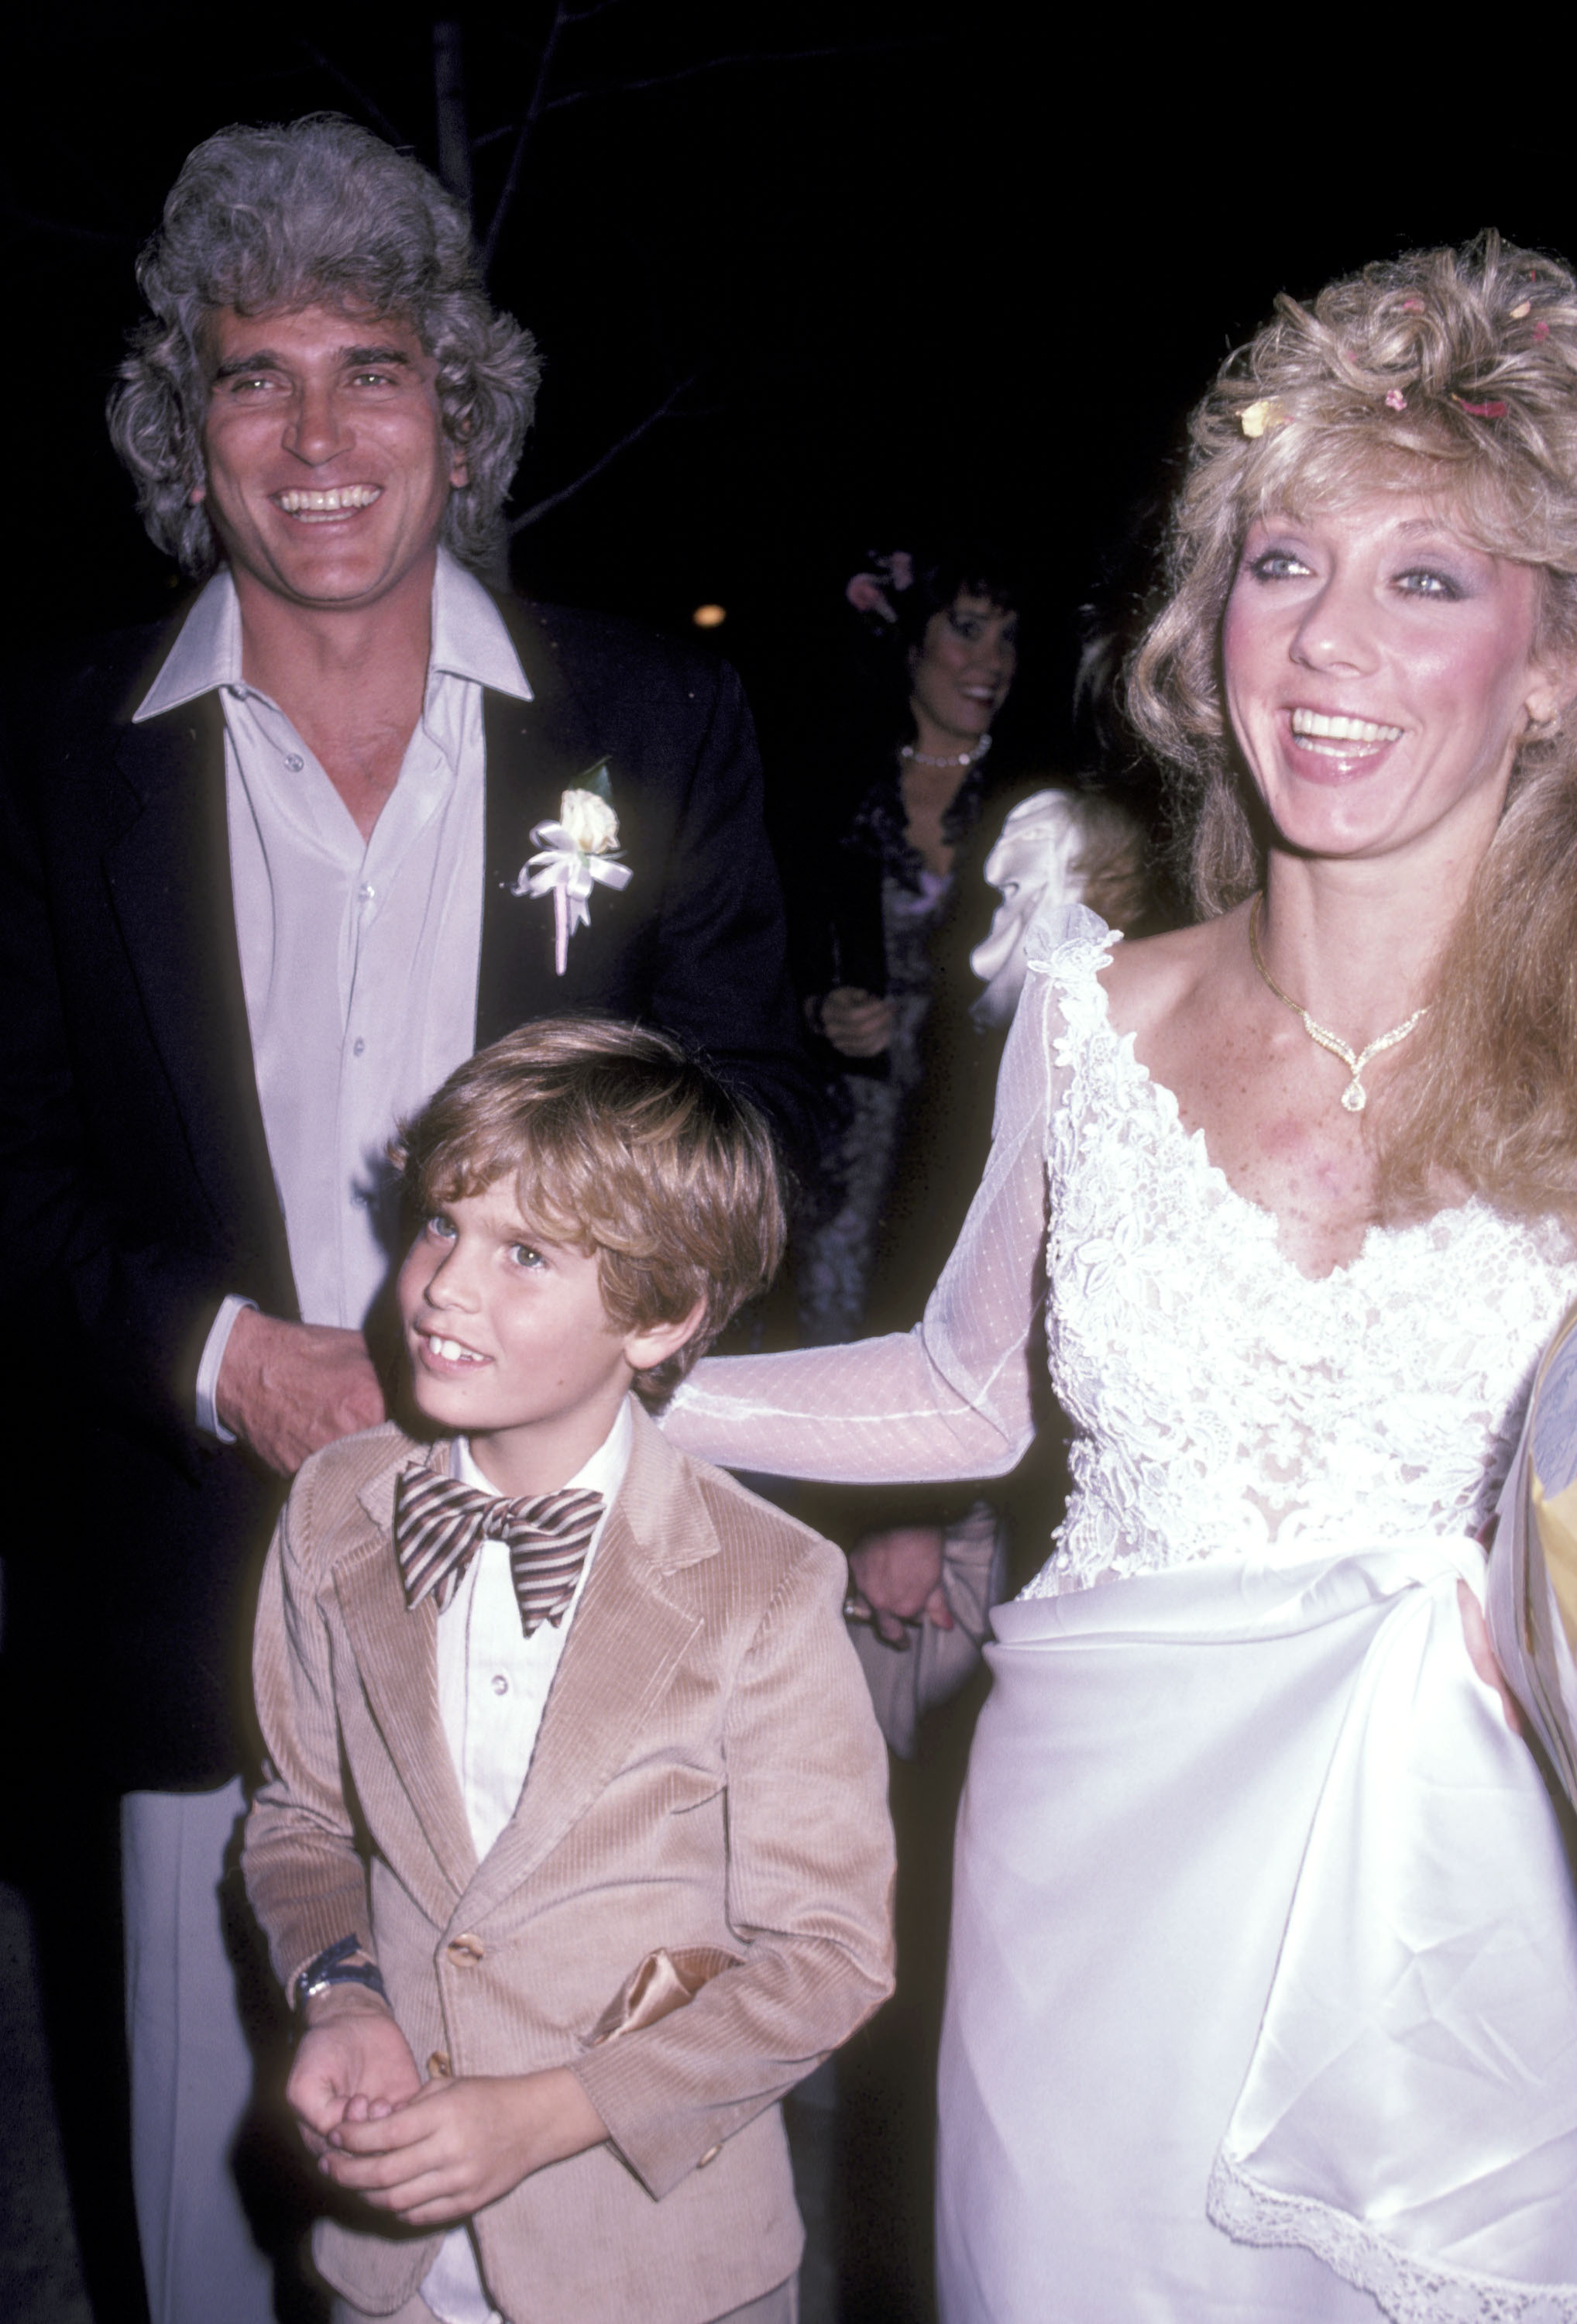 Actor Michael Landon, his then-new bride Cindy Landon and his son Christopher Landon at their wedding reception on February 14, 1983, at La Scala Restaurant in Beverly Hills, California. | Source: Getty Images